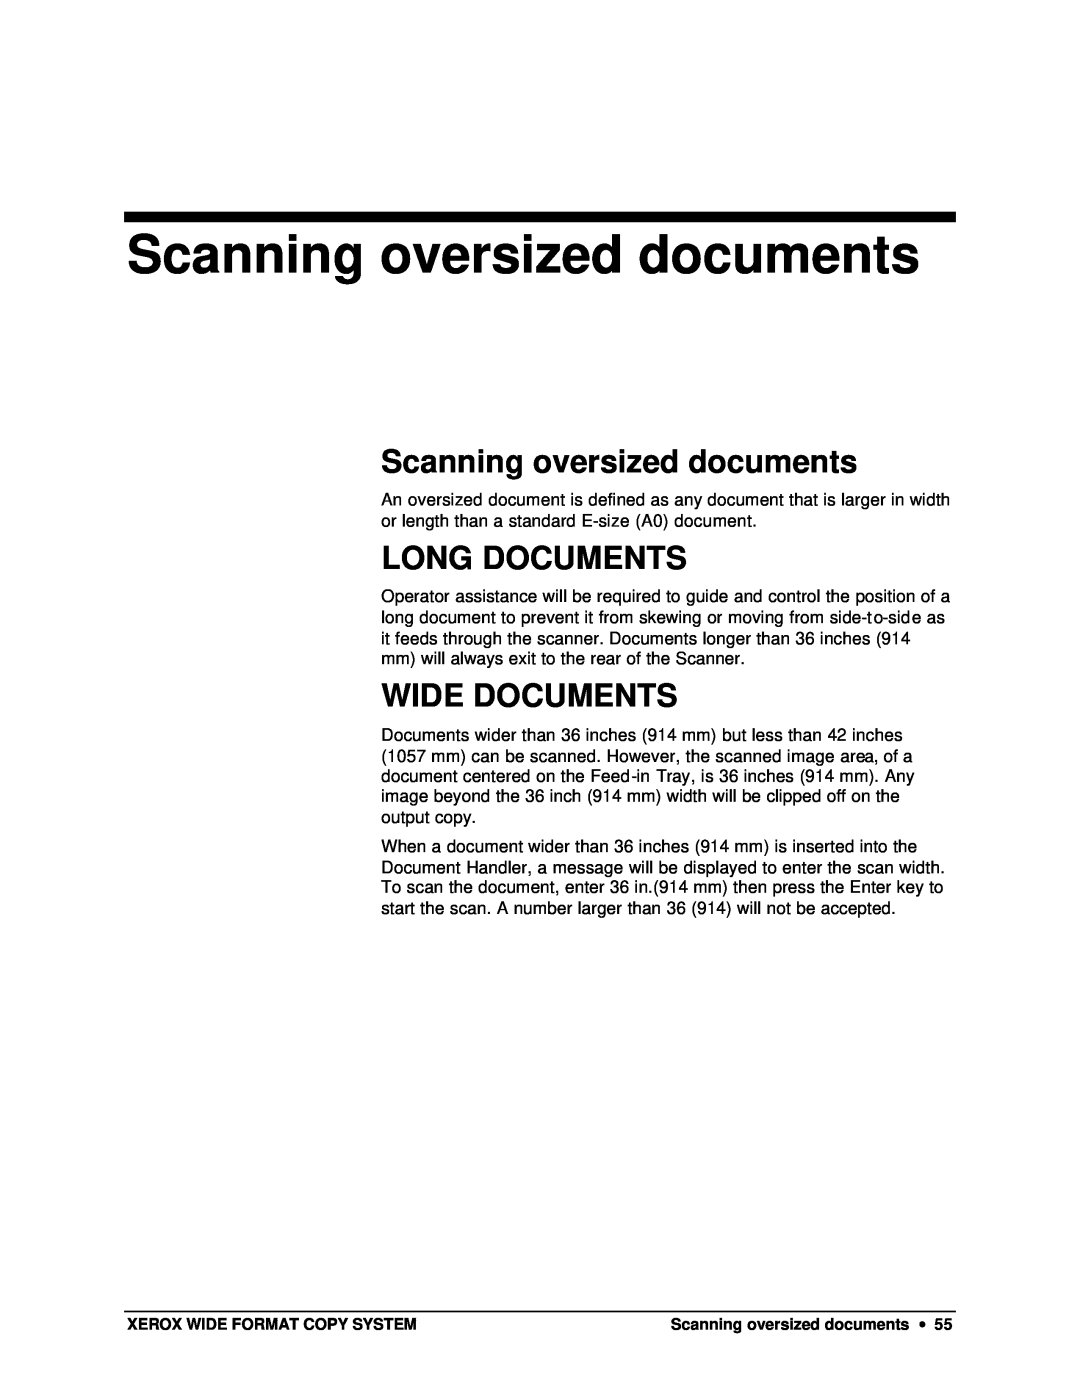 Xerox 8850, 8825, 8830, X2 manual Scanning oversized documents, Long Documents, Wide Documents 